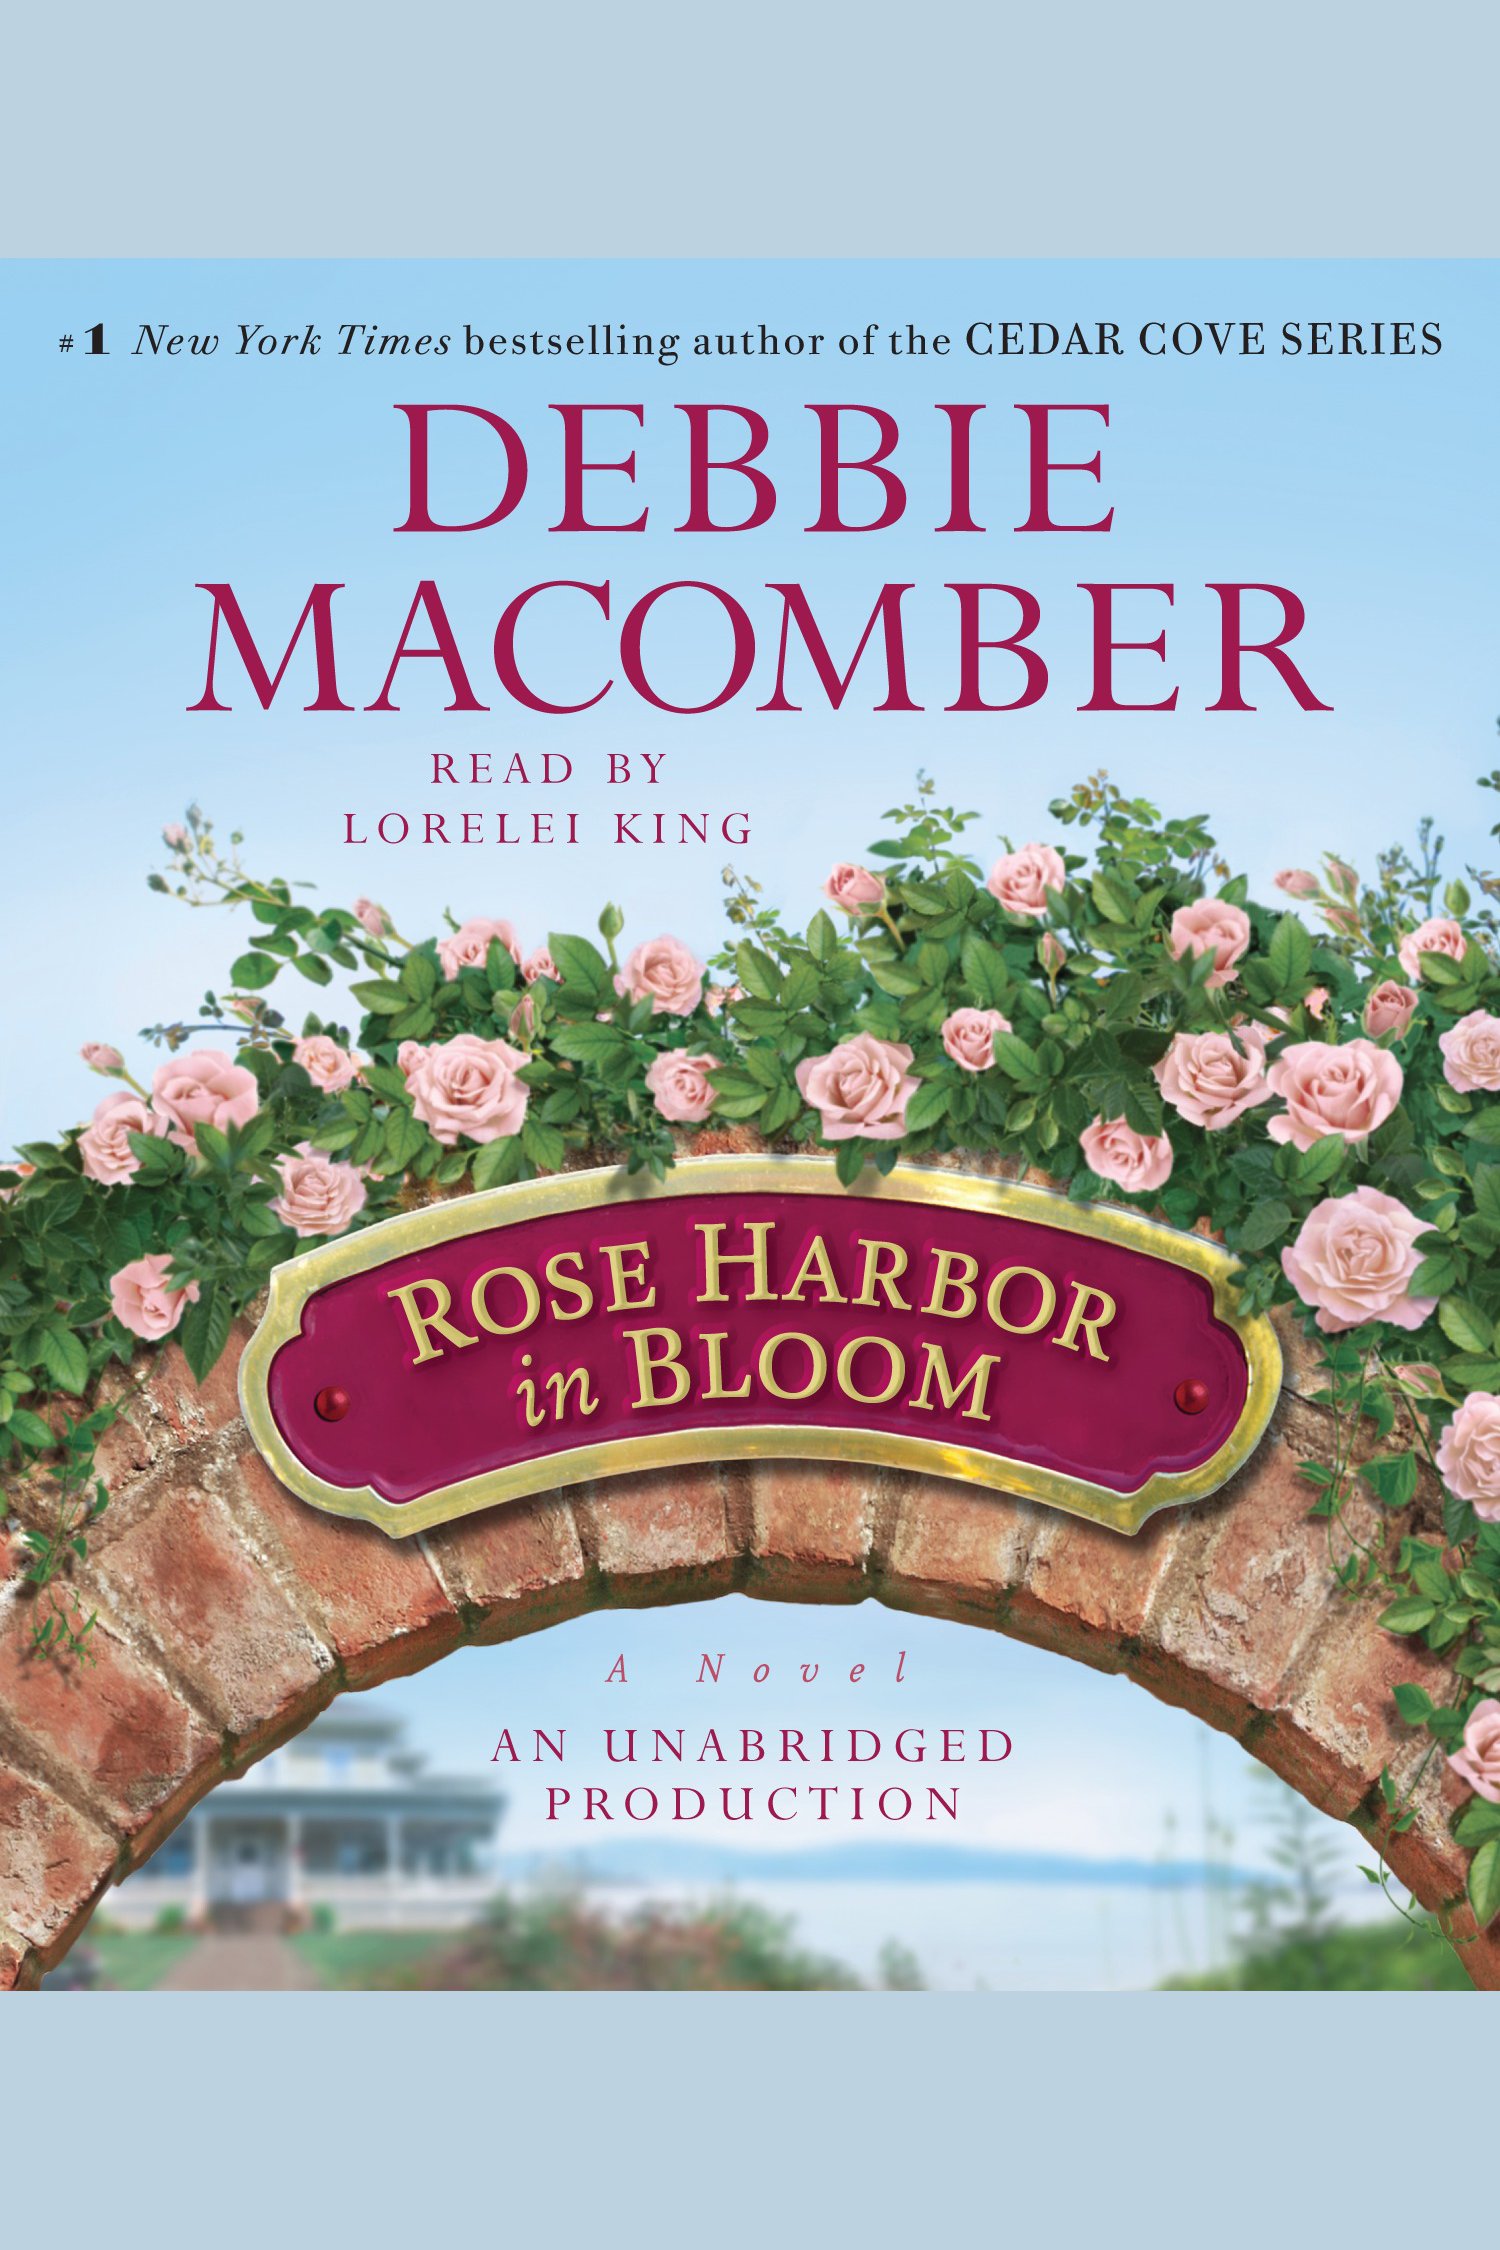 Rose Harbor in bloom cover image